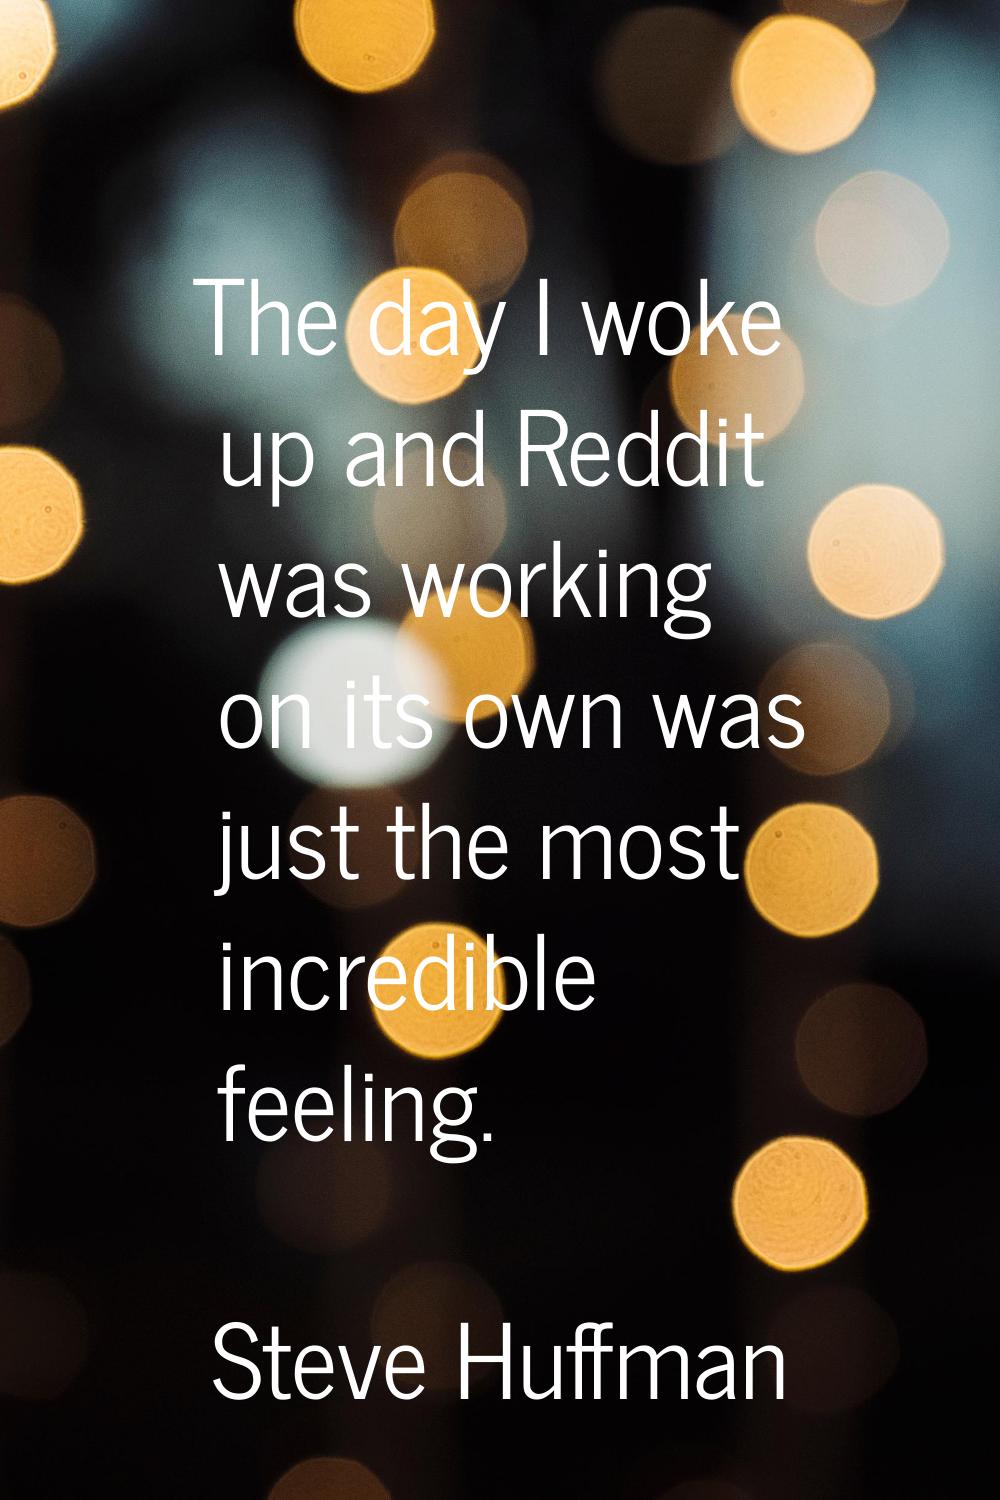 The day I woke up and Reddit was working on its own was just the most incredible feeling.